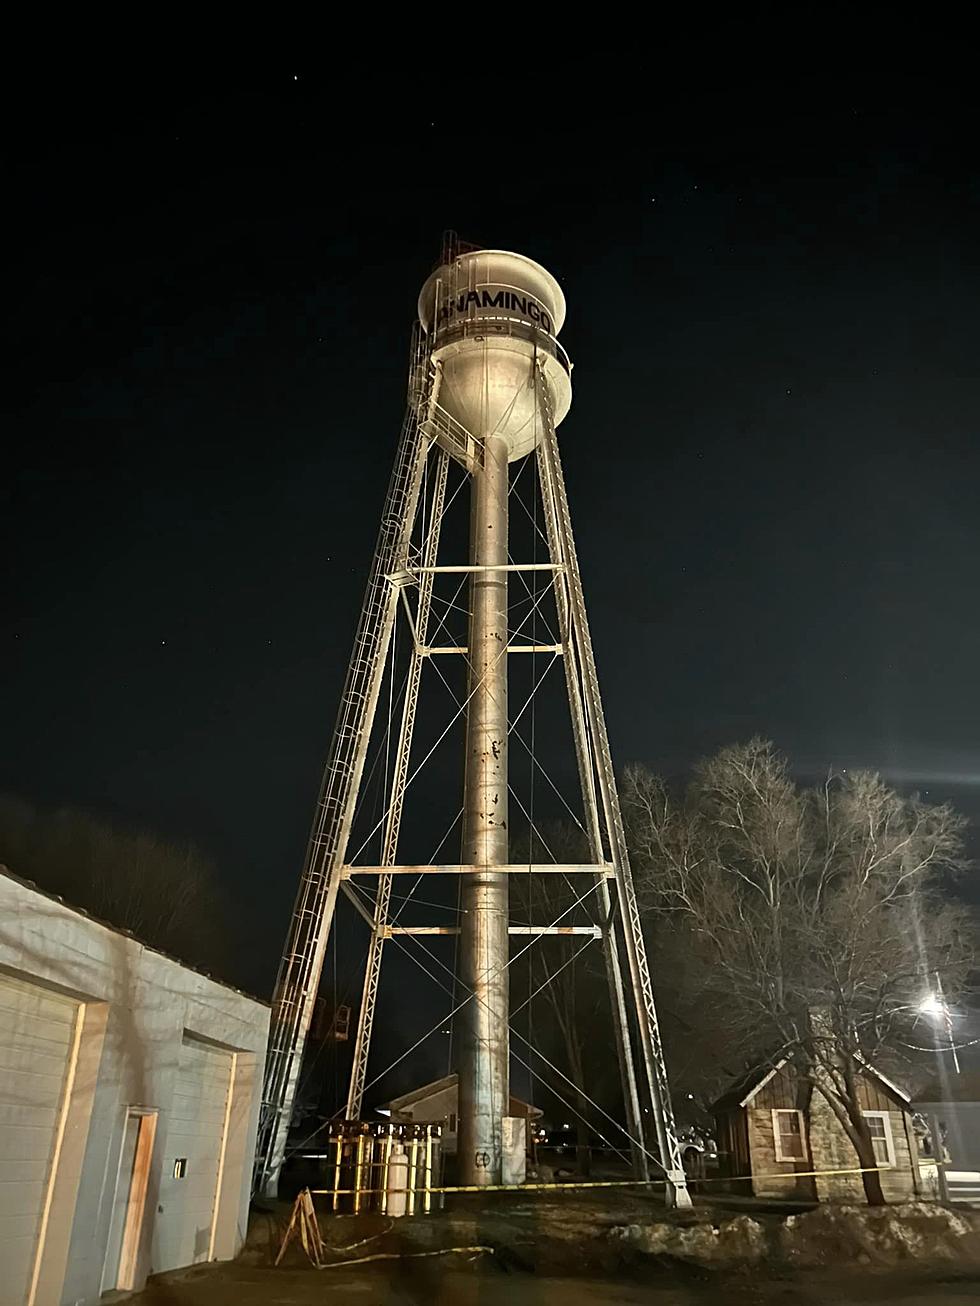 A Shout Out To All Those Minnesota Small Town Water Towers & What They Mean